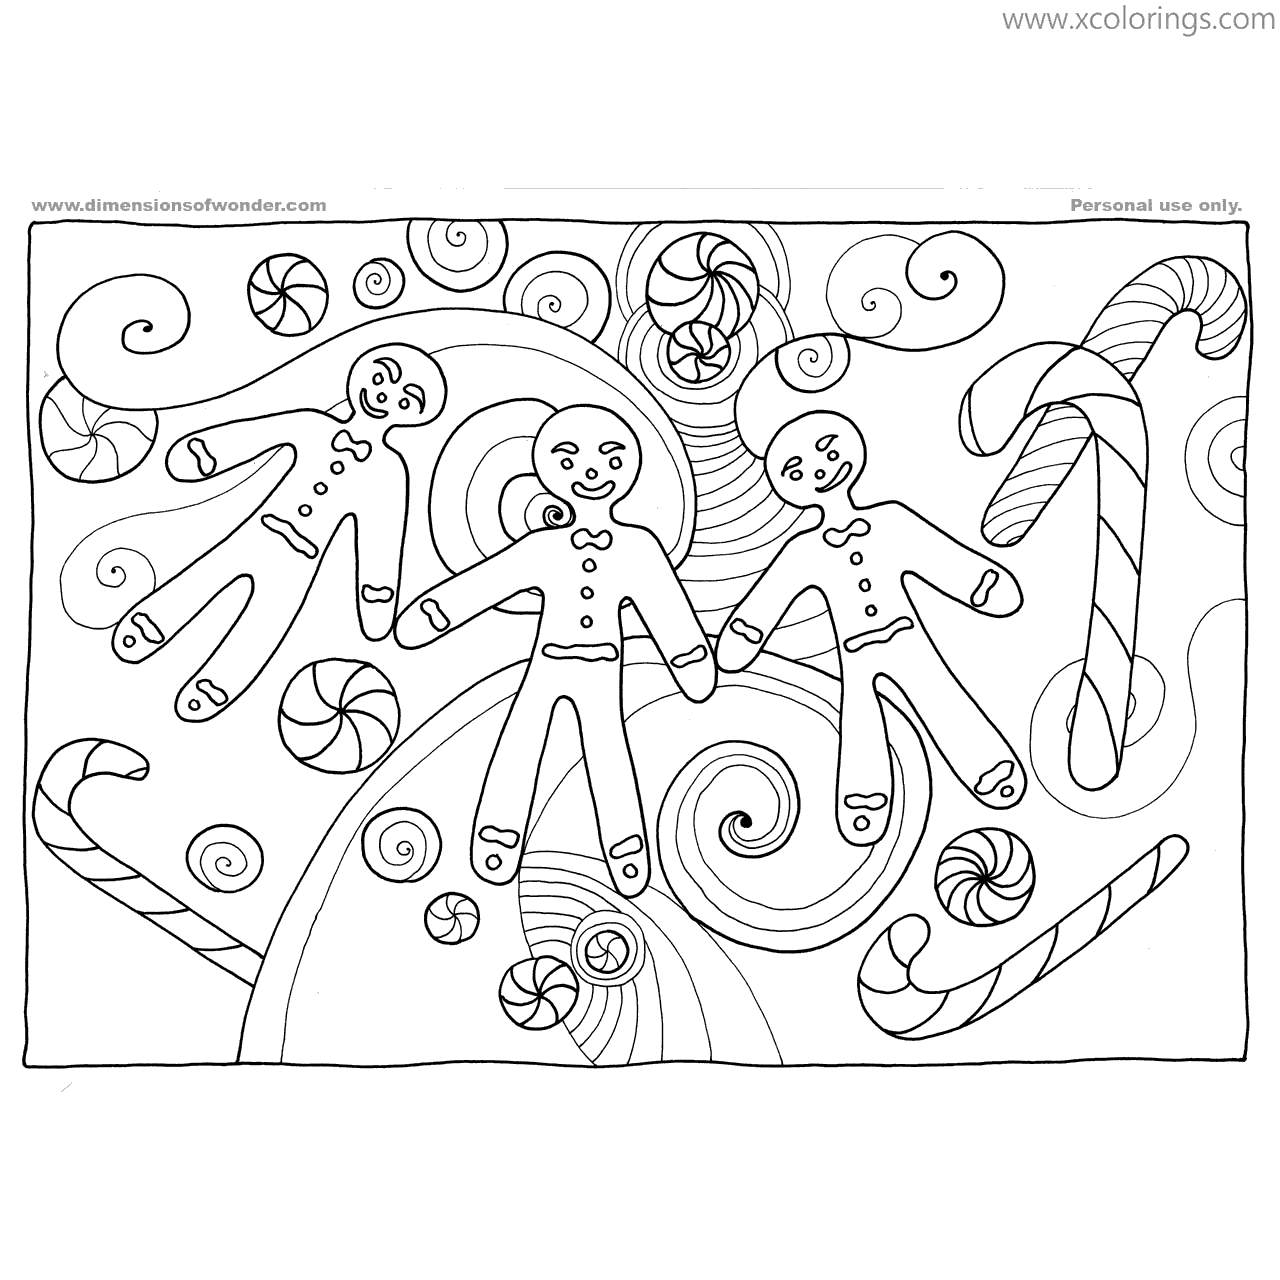 Free Gingerbread Man Doodle Coloring Pages printable